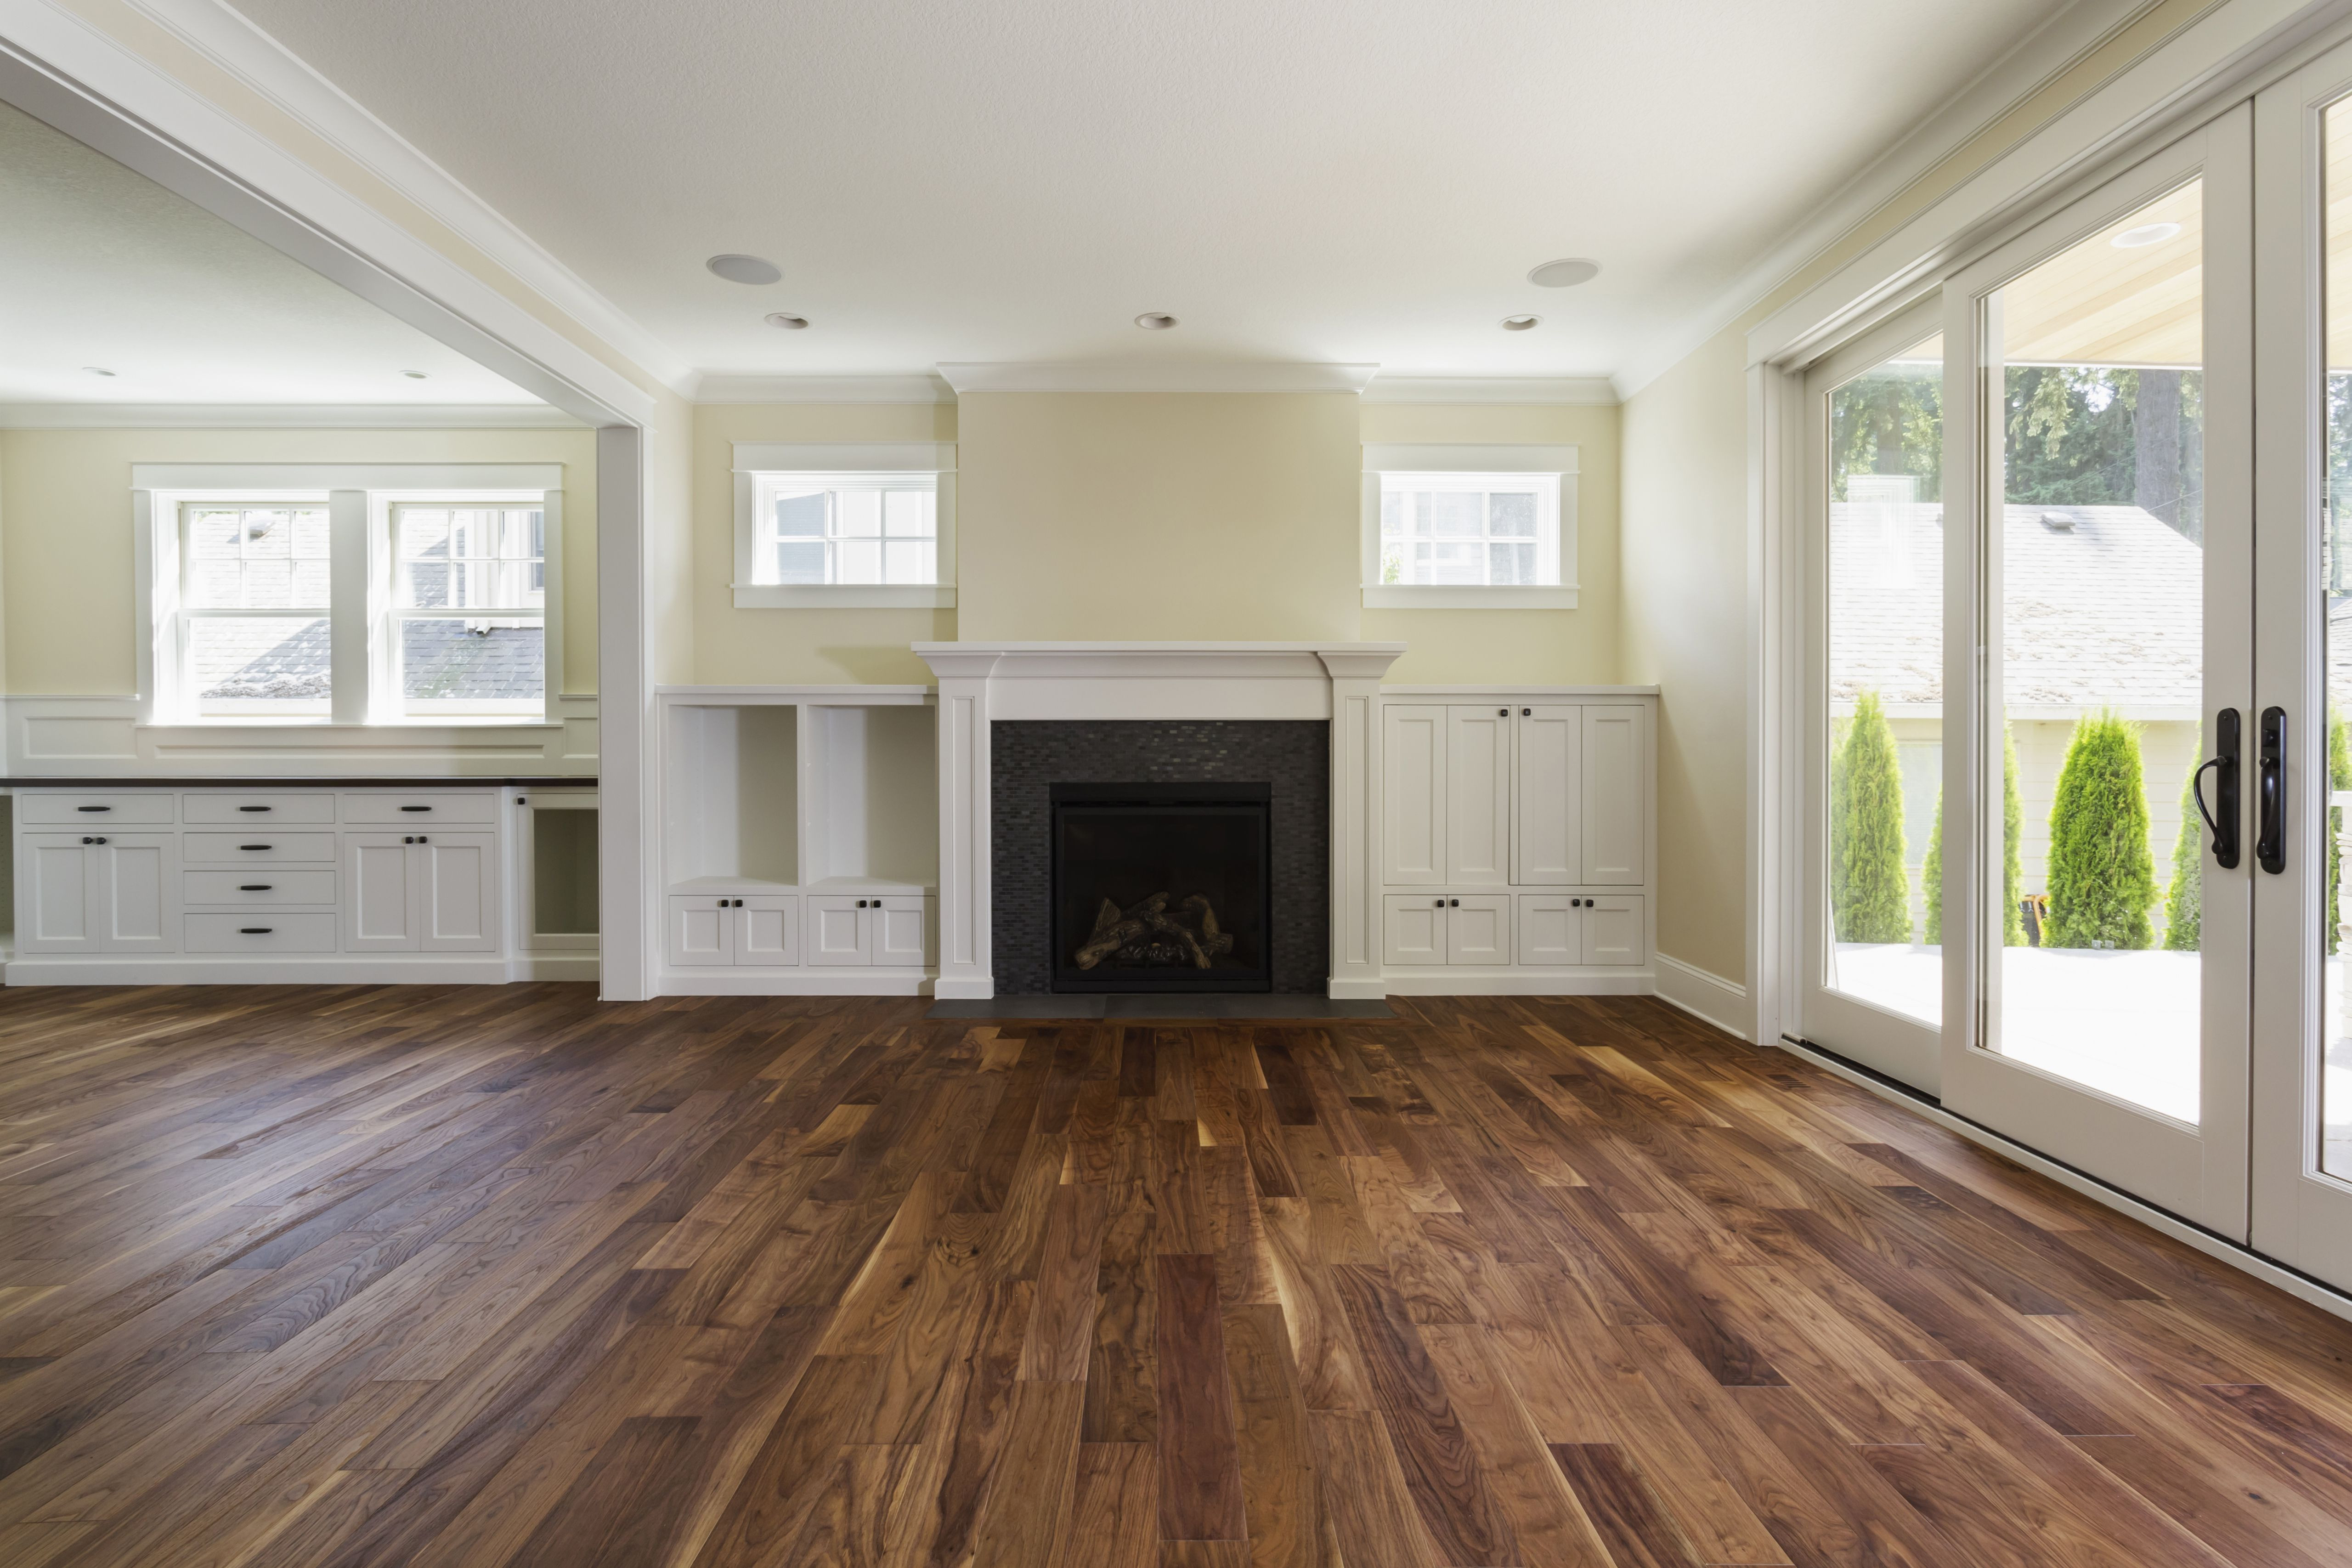 23 Elegant Cost to Pull Up Carpet and Refinish Hardwood Floors 2024 free download cost to pull up carpet and refinish hardwood floors of the pros and cons of prefinished hardwood flooring in fireplace and built in shelves in living room 482143011 57bef8e33df78cc16e035397